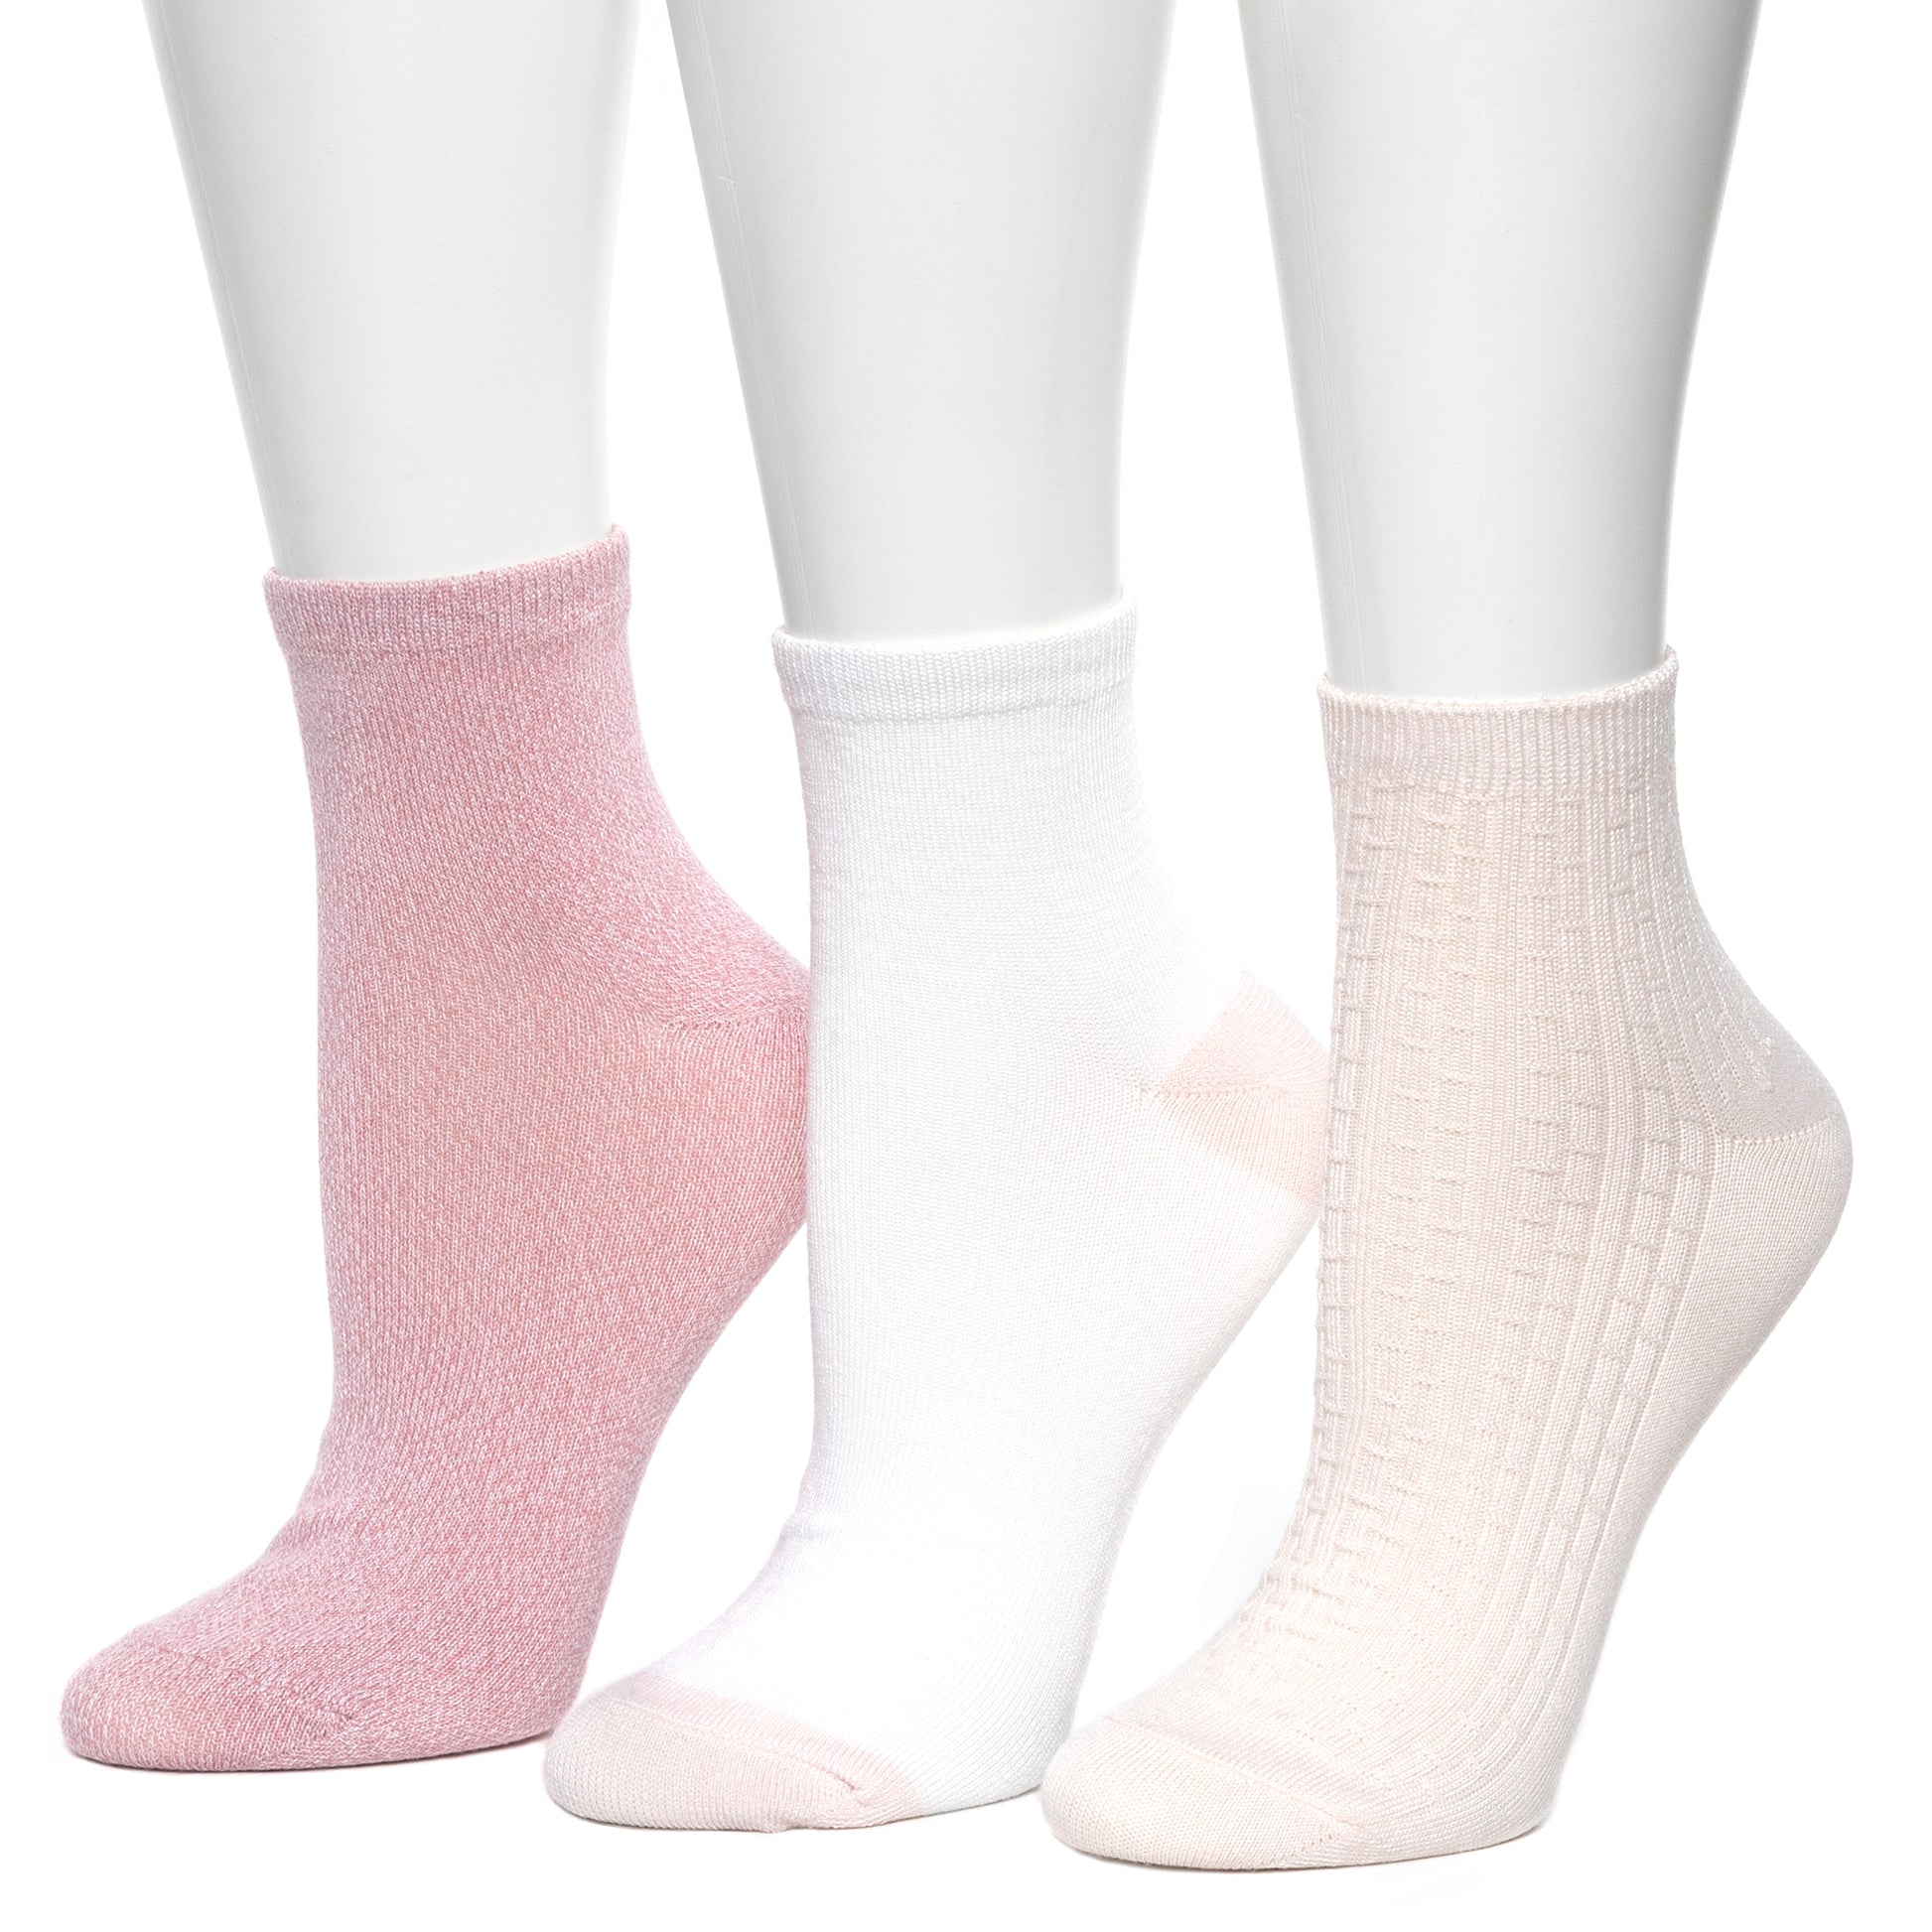 Pearl/Blush;@Vertical Texture Anklet Sock 3 Pack